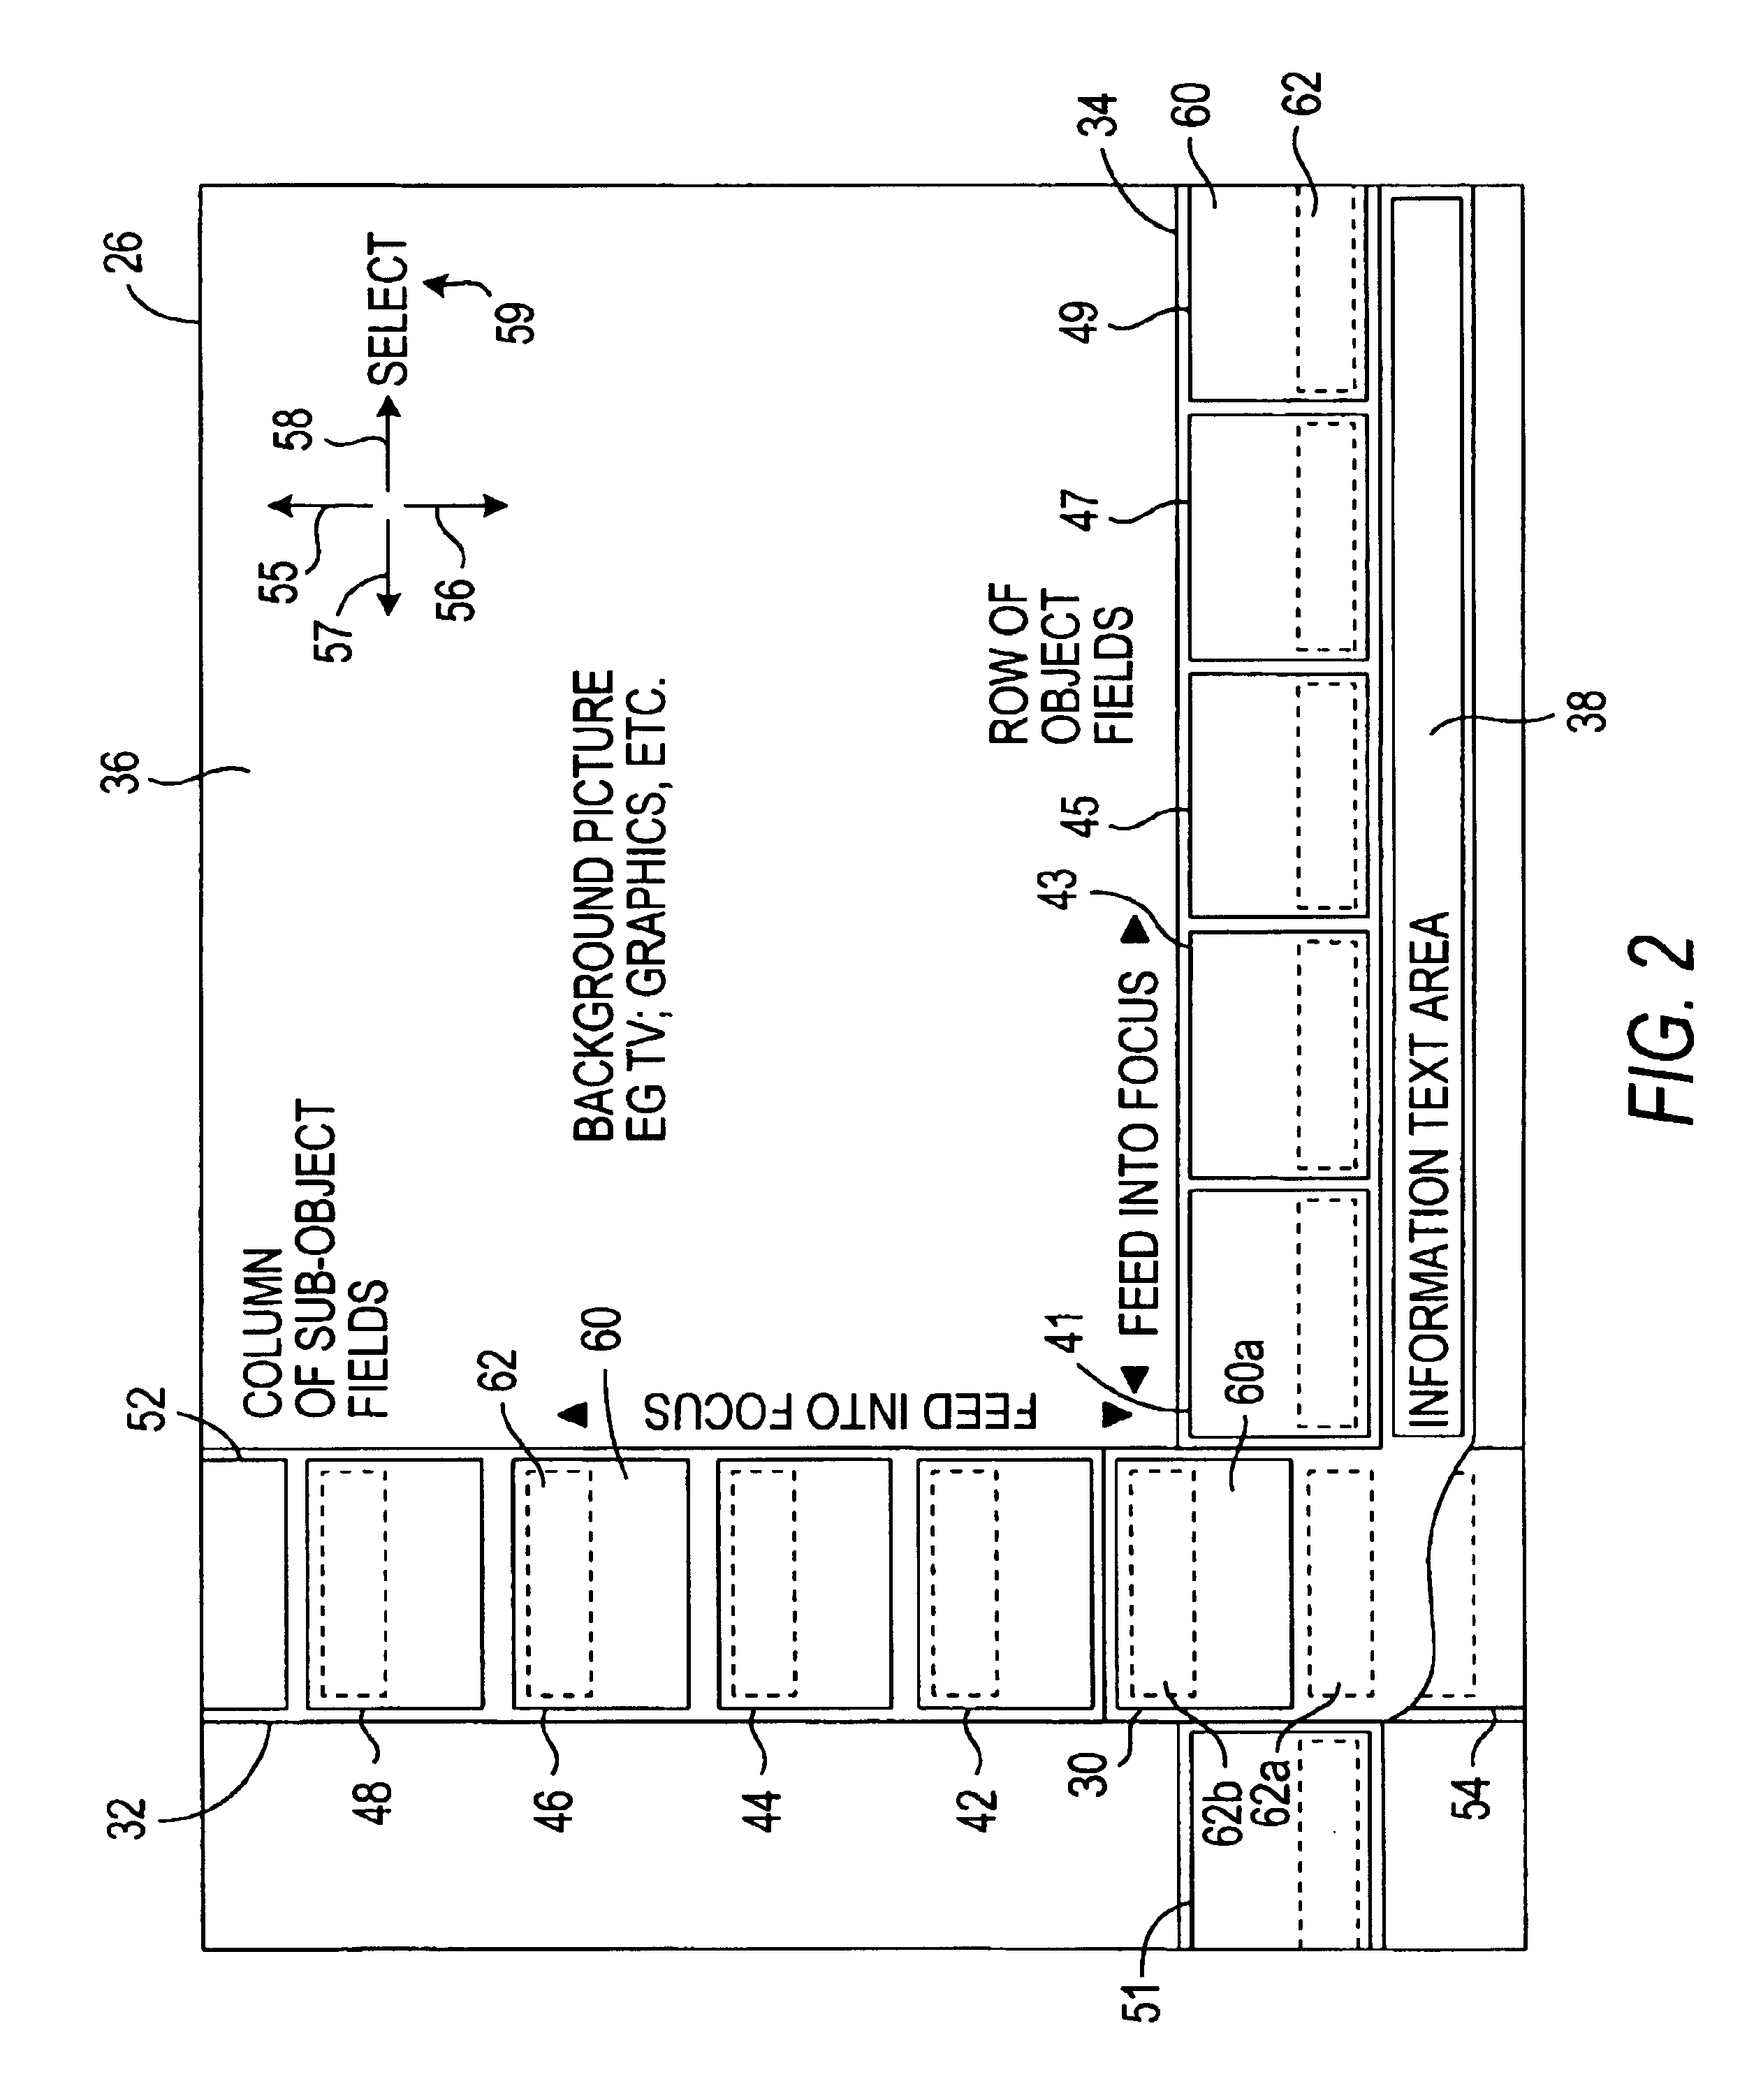 Method and apparatus for scrollable cross-point navigation in a calendar user interface